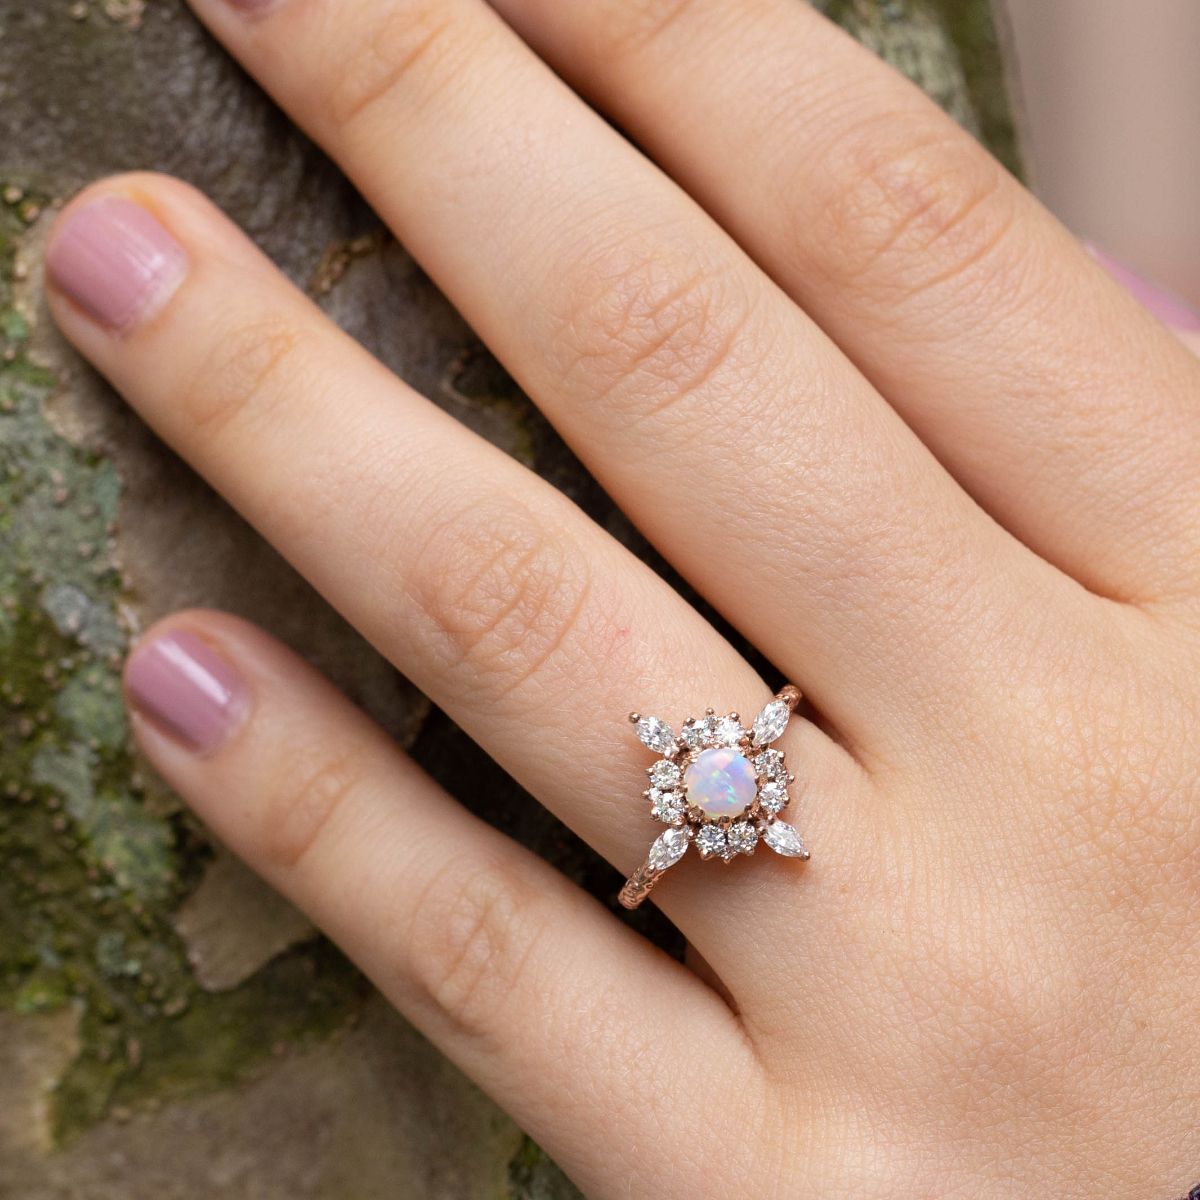 Is Opal A Good Choice For An Engagement Ring? | Custommade.Com